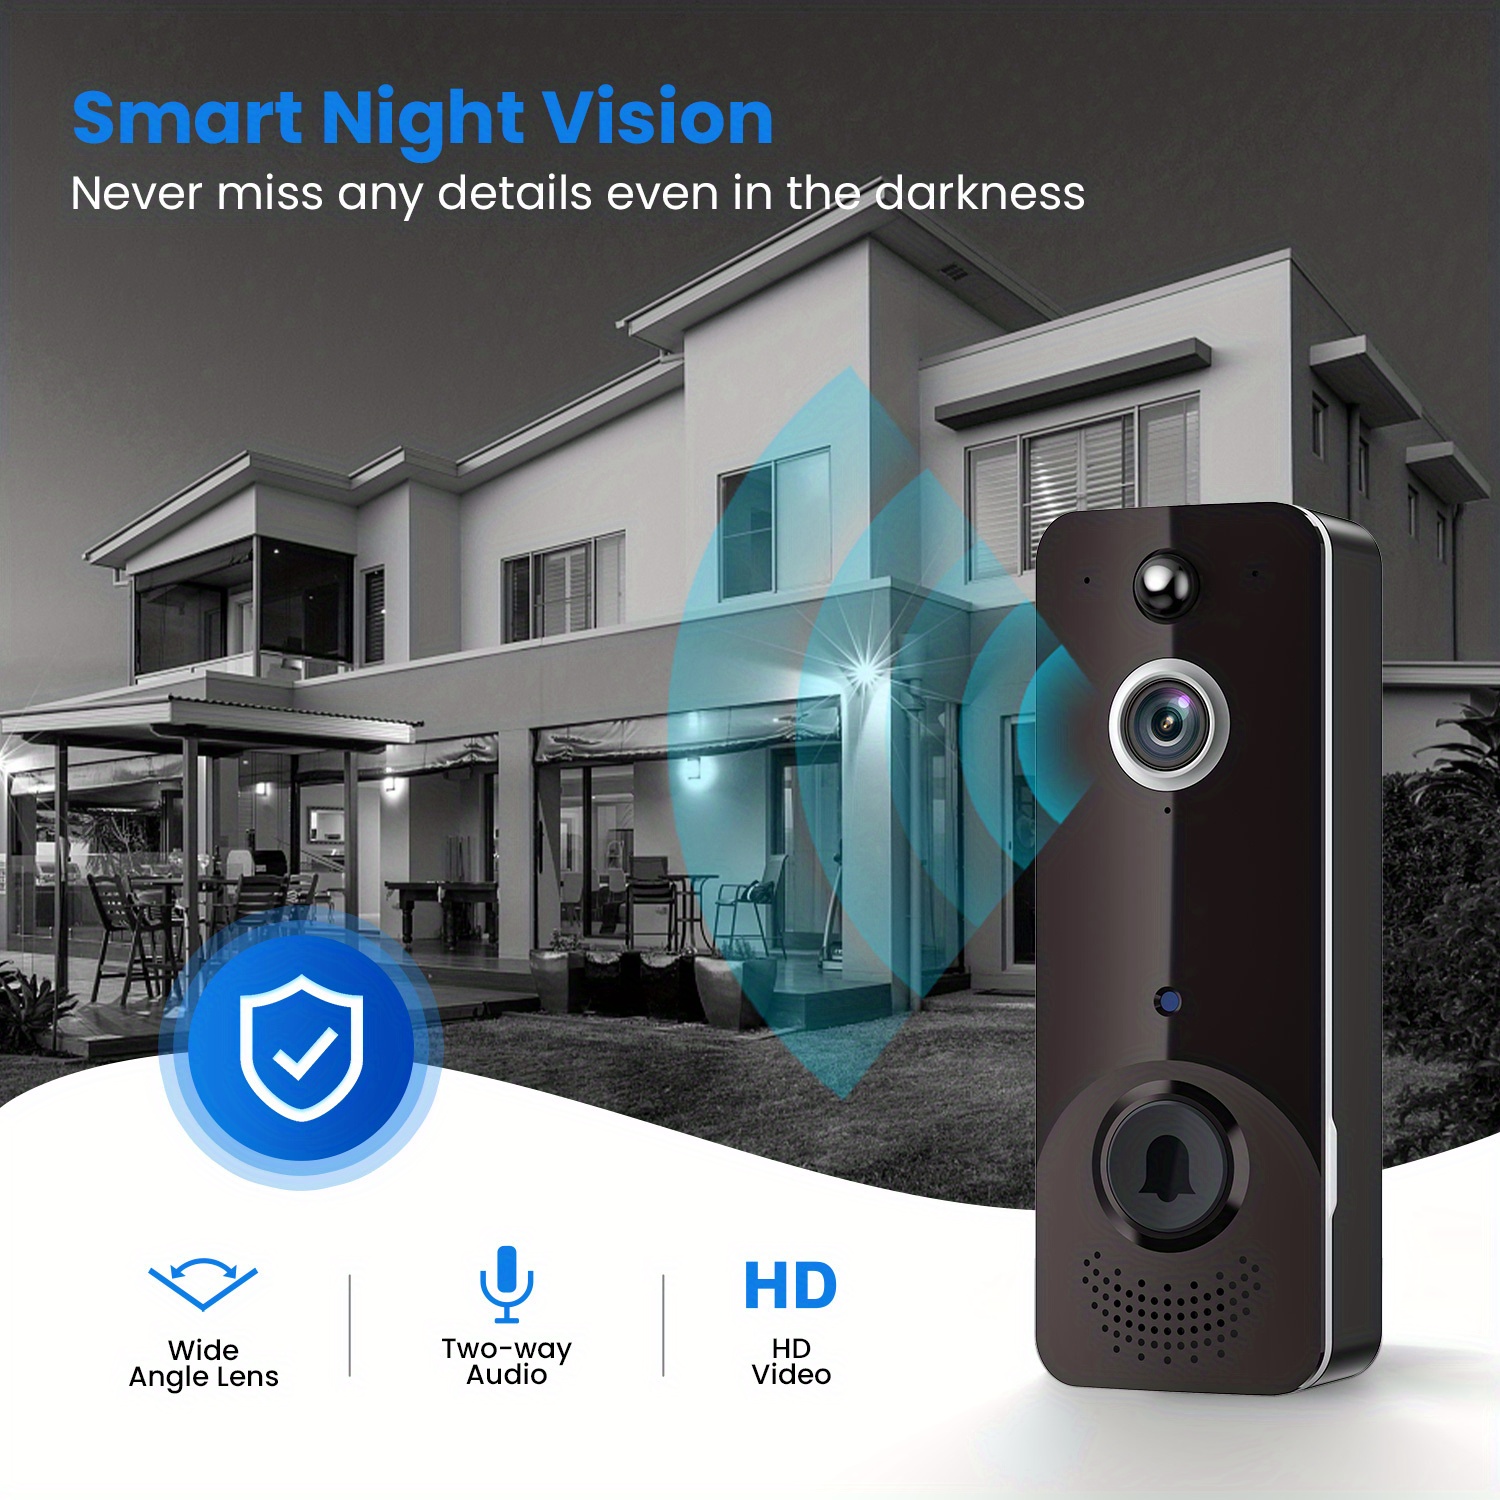 smart wireless doorbell camera with rechargeable batteries 2 way audio ai human detection pir motion detector 2 4g wifi hd live image night vision instant alerts cloud storage chime home security system details 3